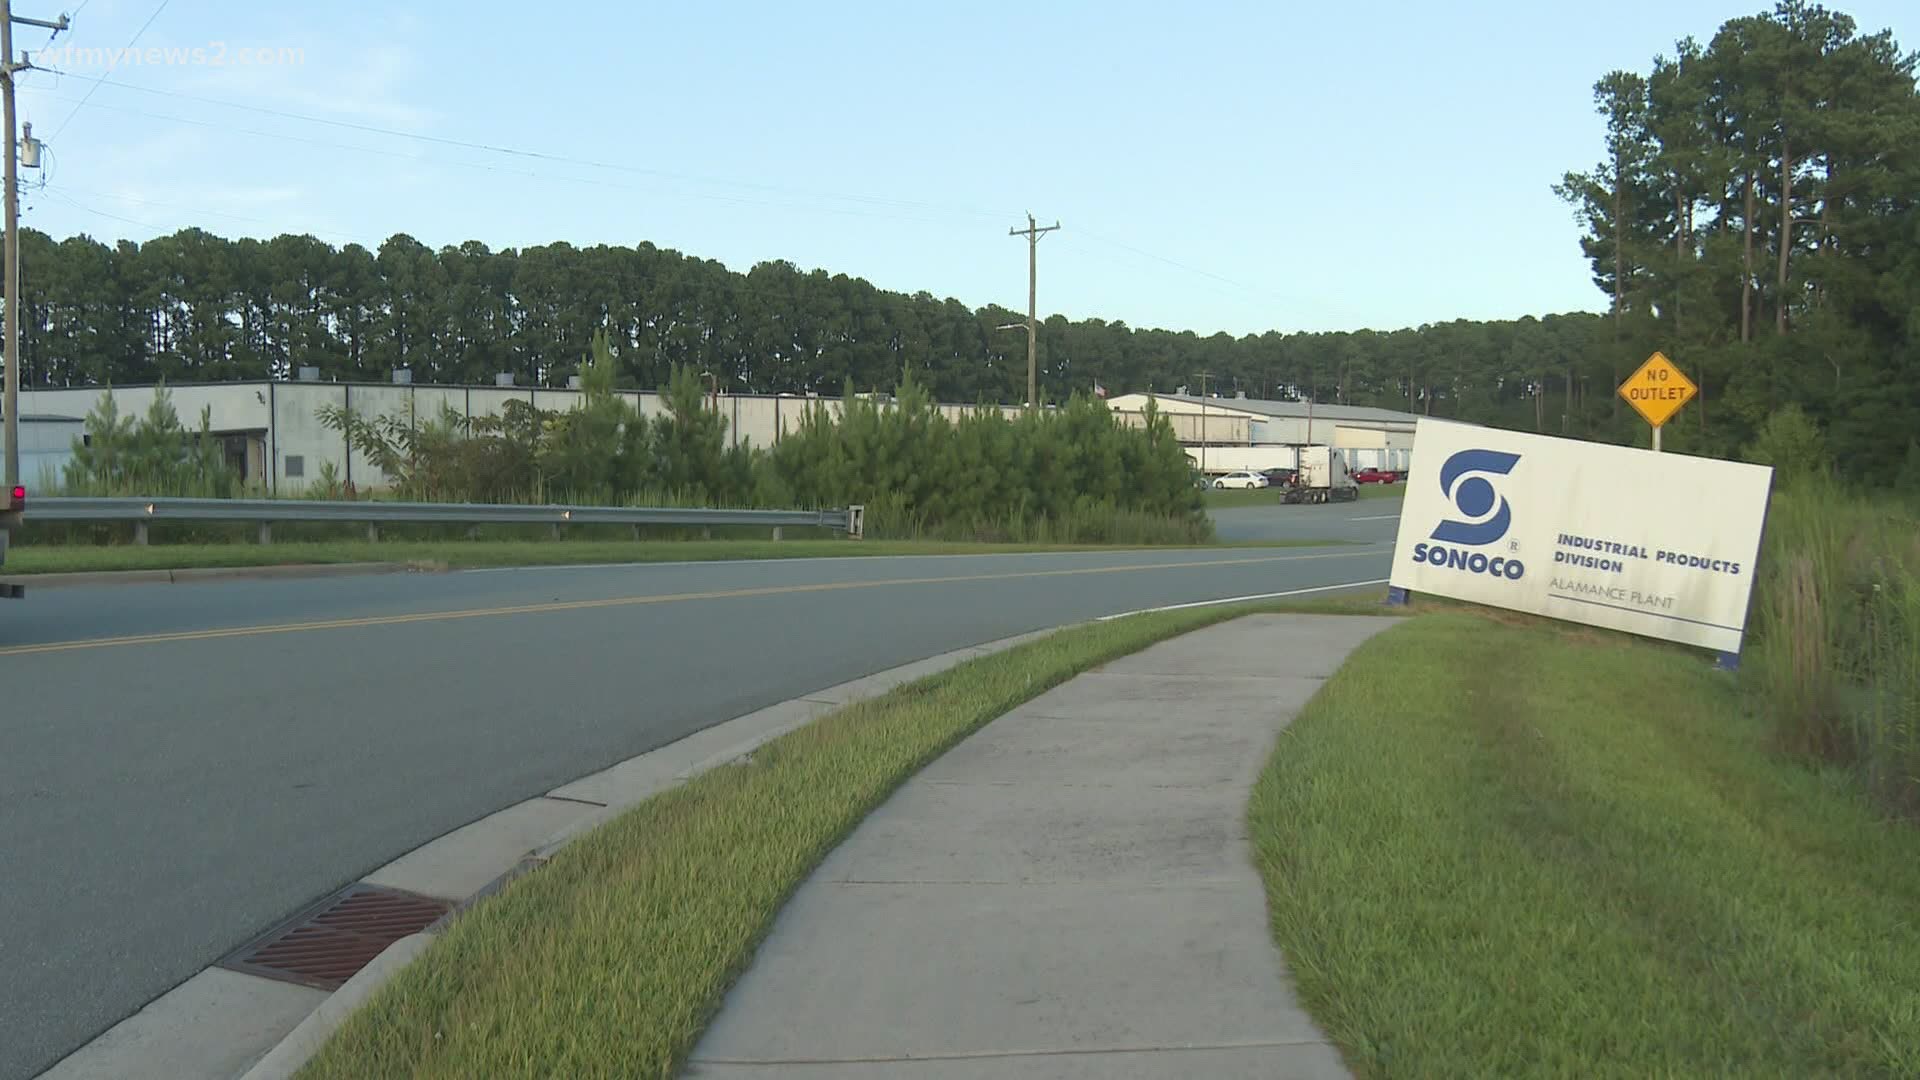 Sonoco said 75 people will lose their jobs. The closure is a result of financial hardship caused by coronavirus as well as shifts within the industry.